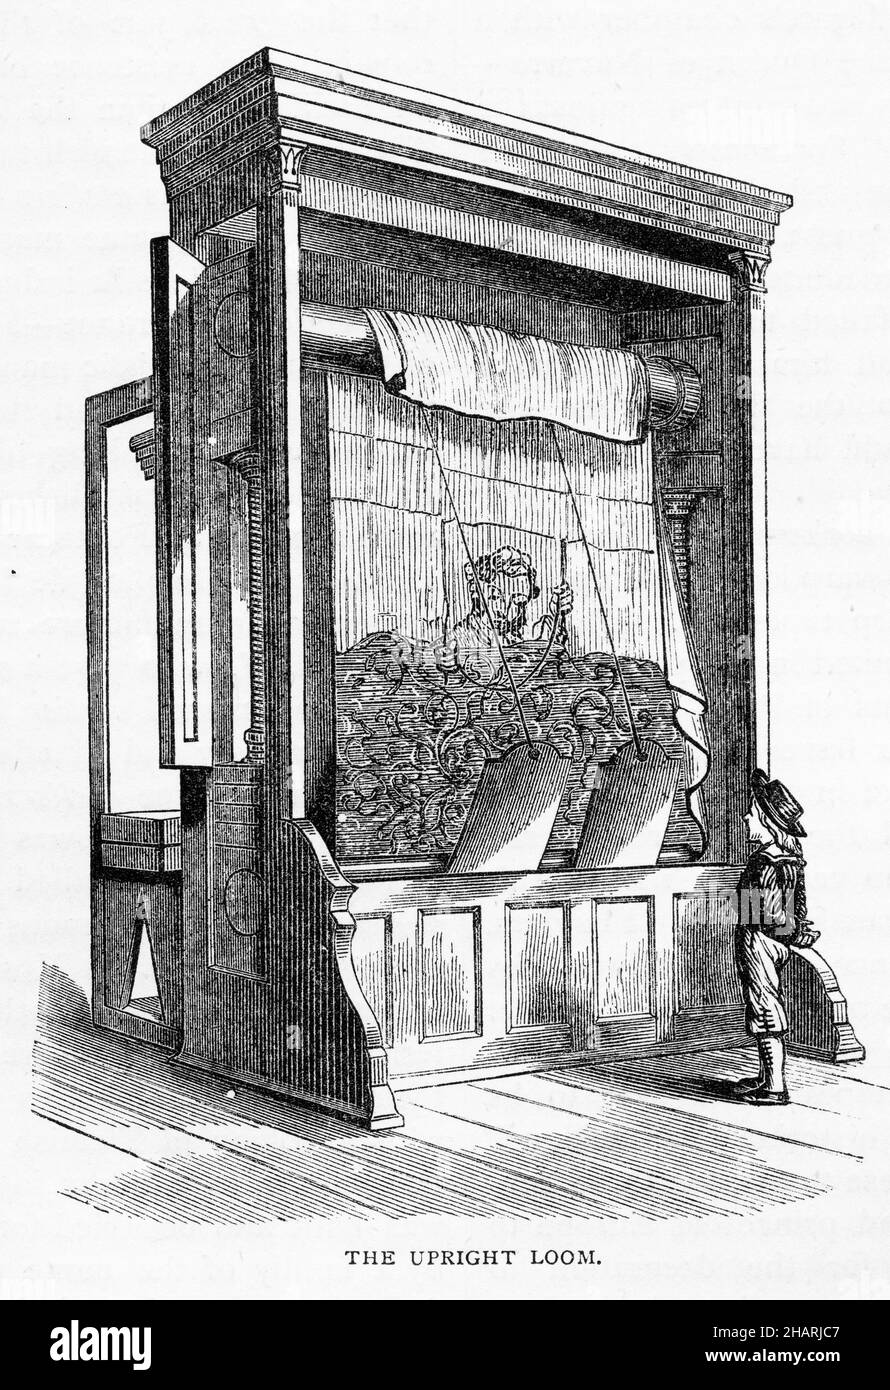 Engraving of an upright loom for weaving cloth Stock Photo